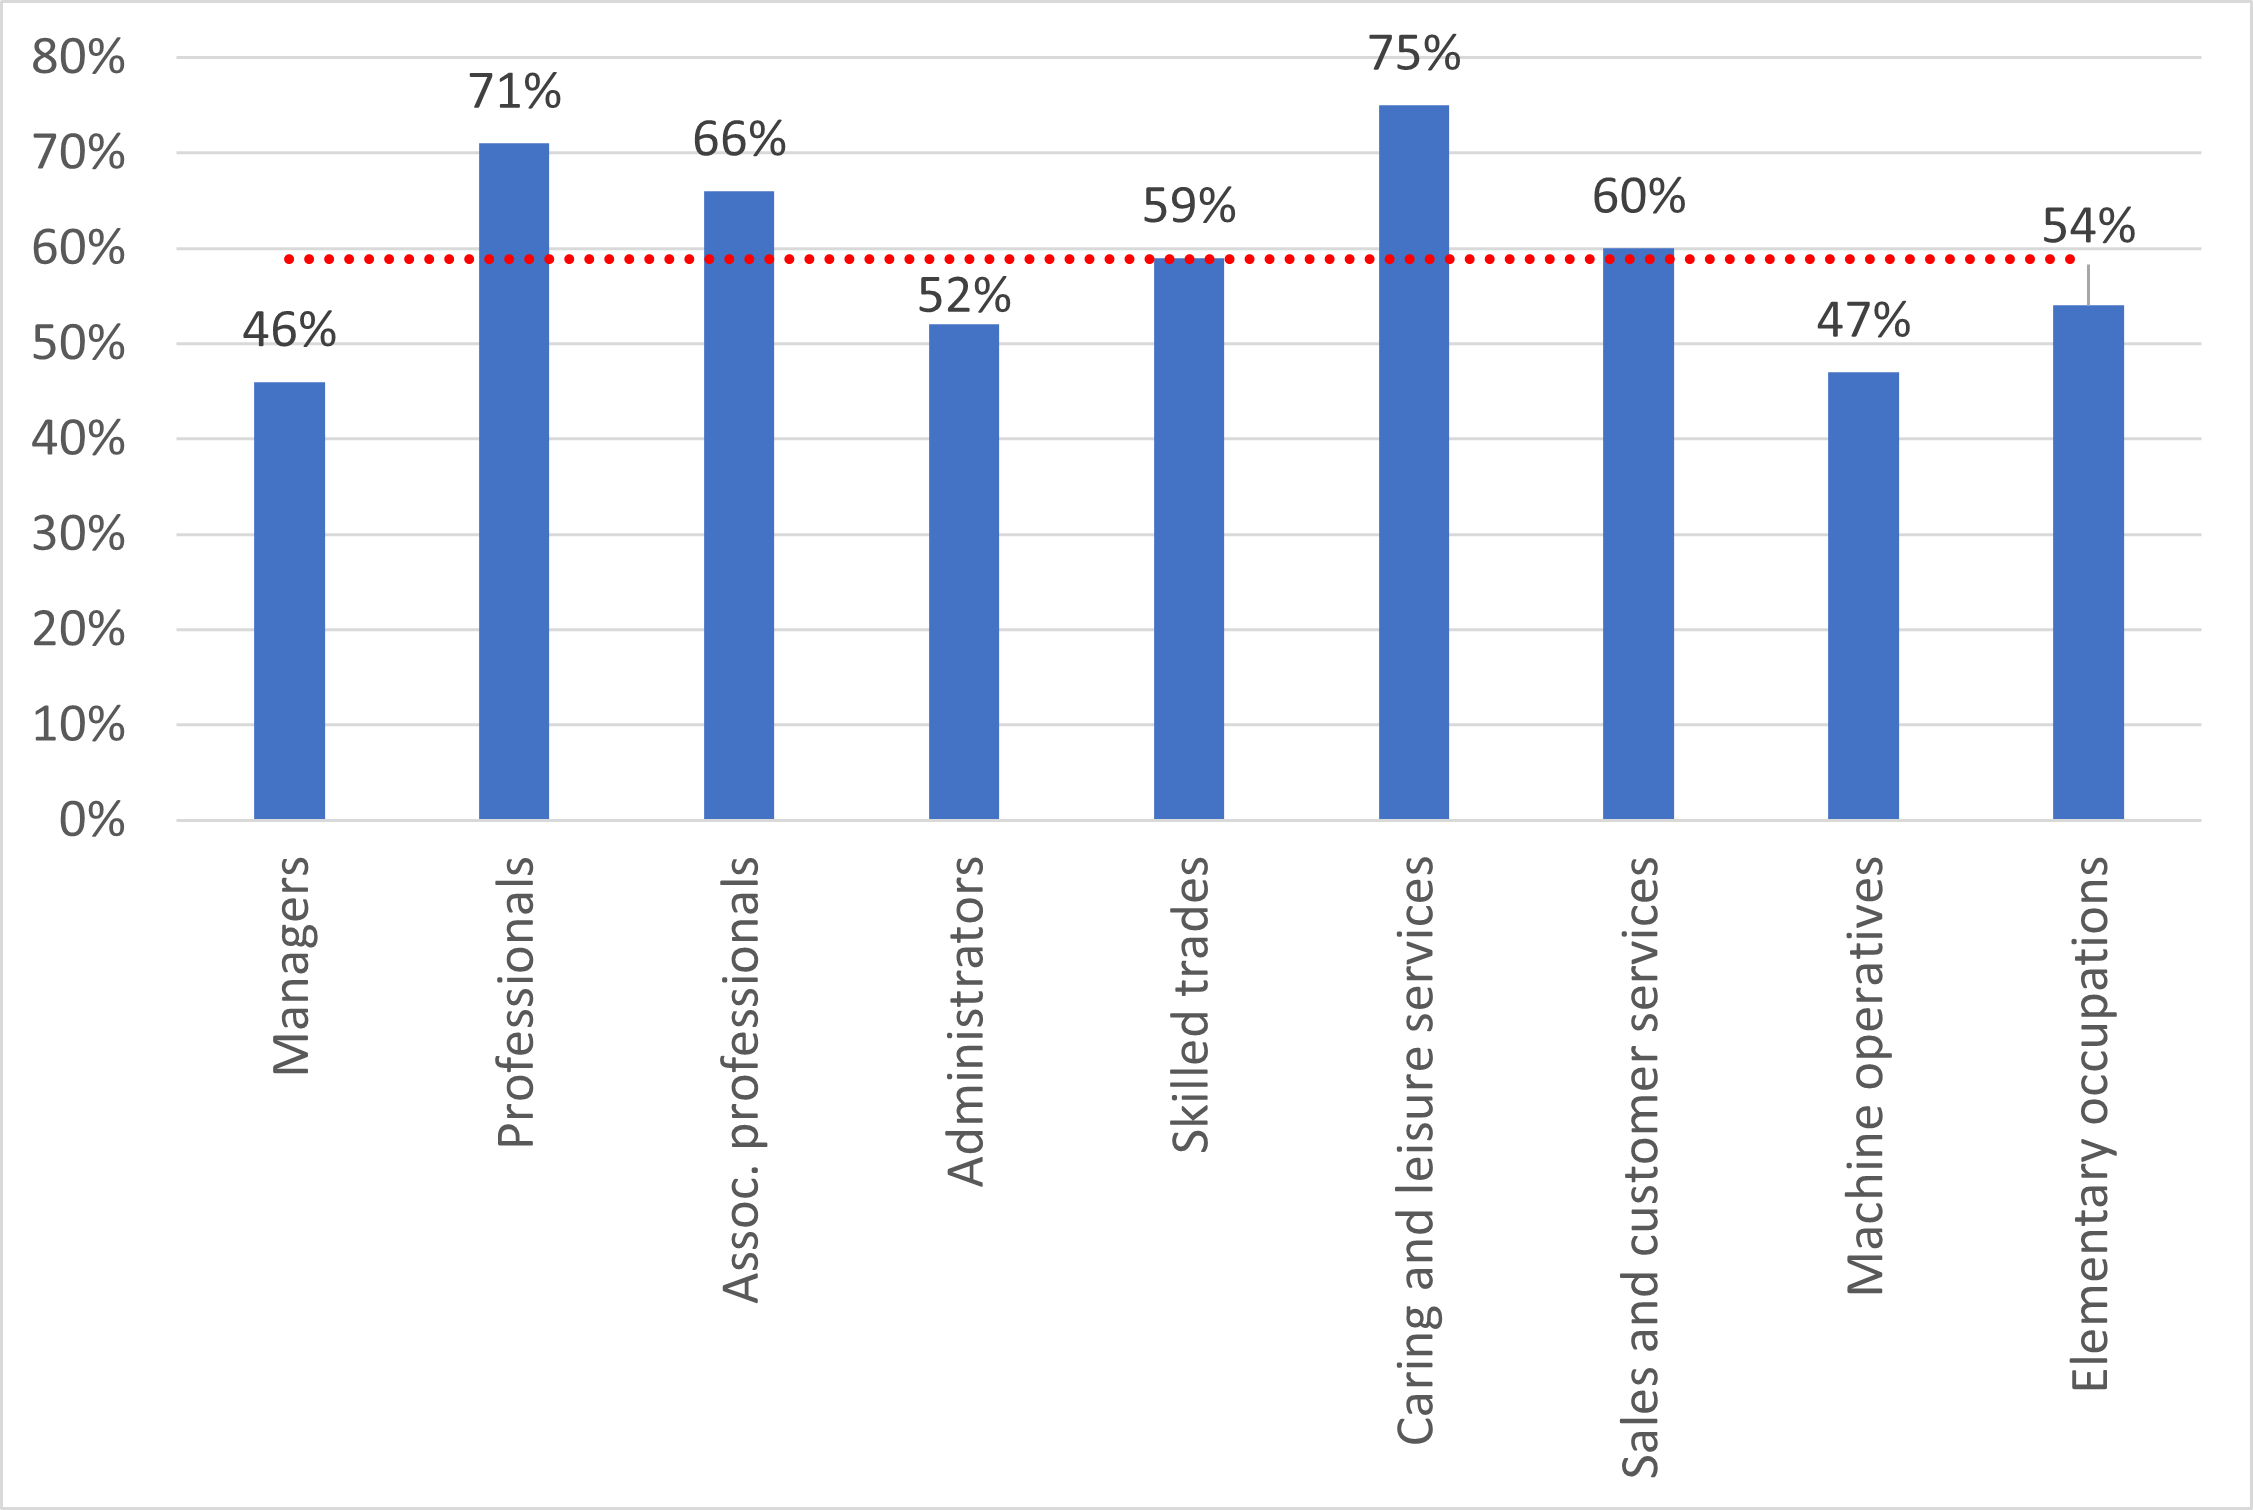 Proportion of staff trained over the last 12 months by occupation in England, Northern Ireland and Wales, 2019